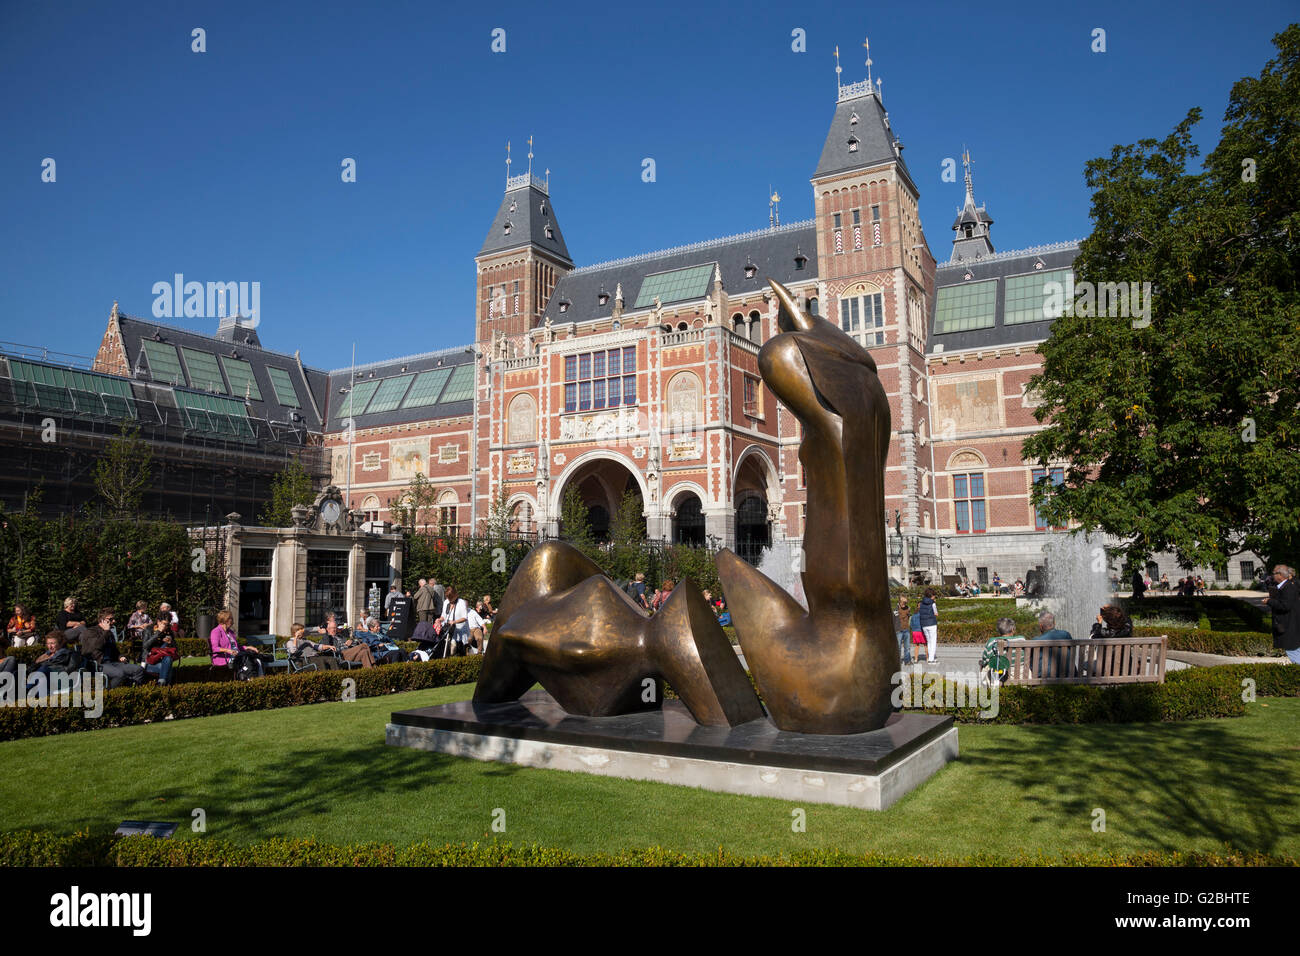 Sculpture in front of the Rijksmuseum, Museumplein square, Amsterdam, North  Holland province, Netherlands Stock Photo - Alamy